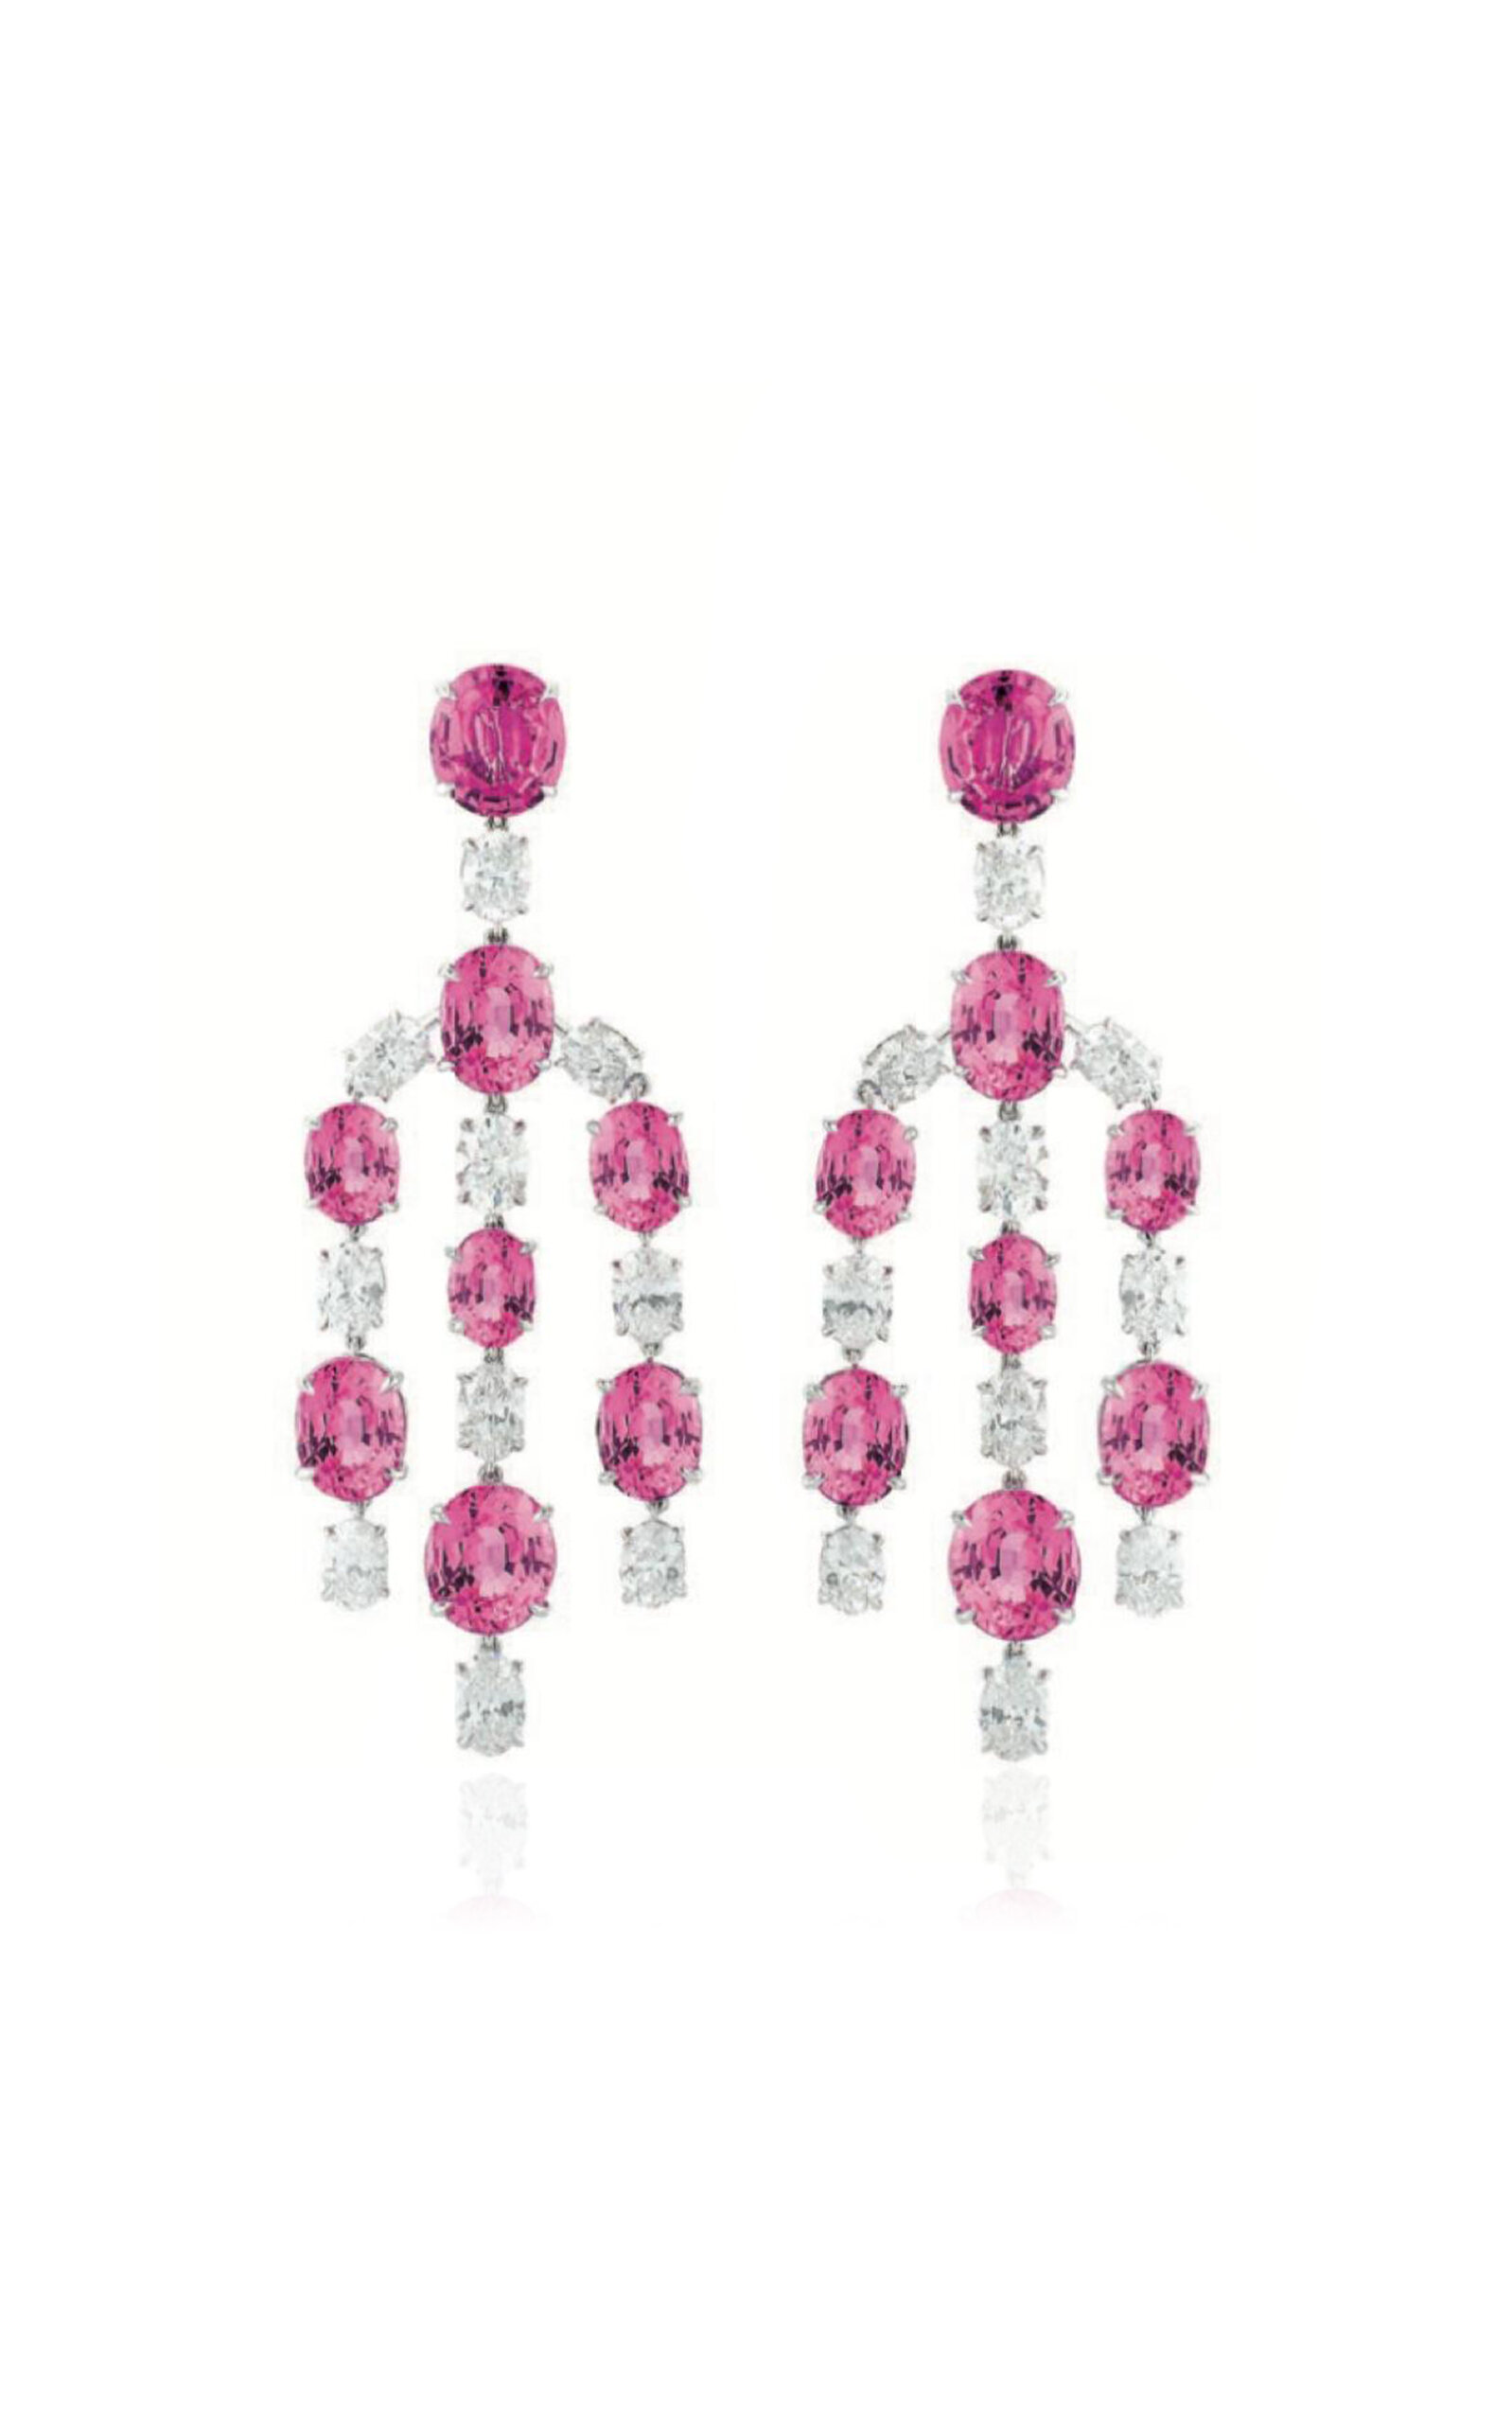 Platinum One of a Kind Diamond & Pink Sapphire Chandelier Earrings